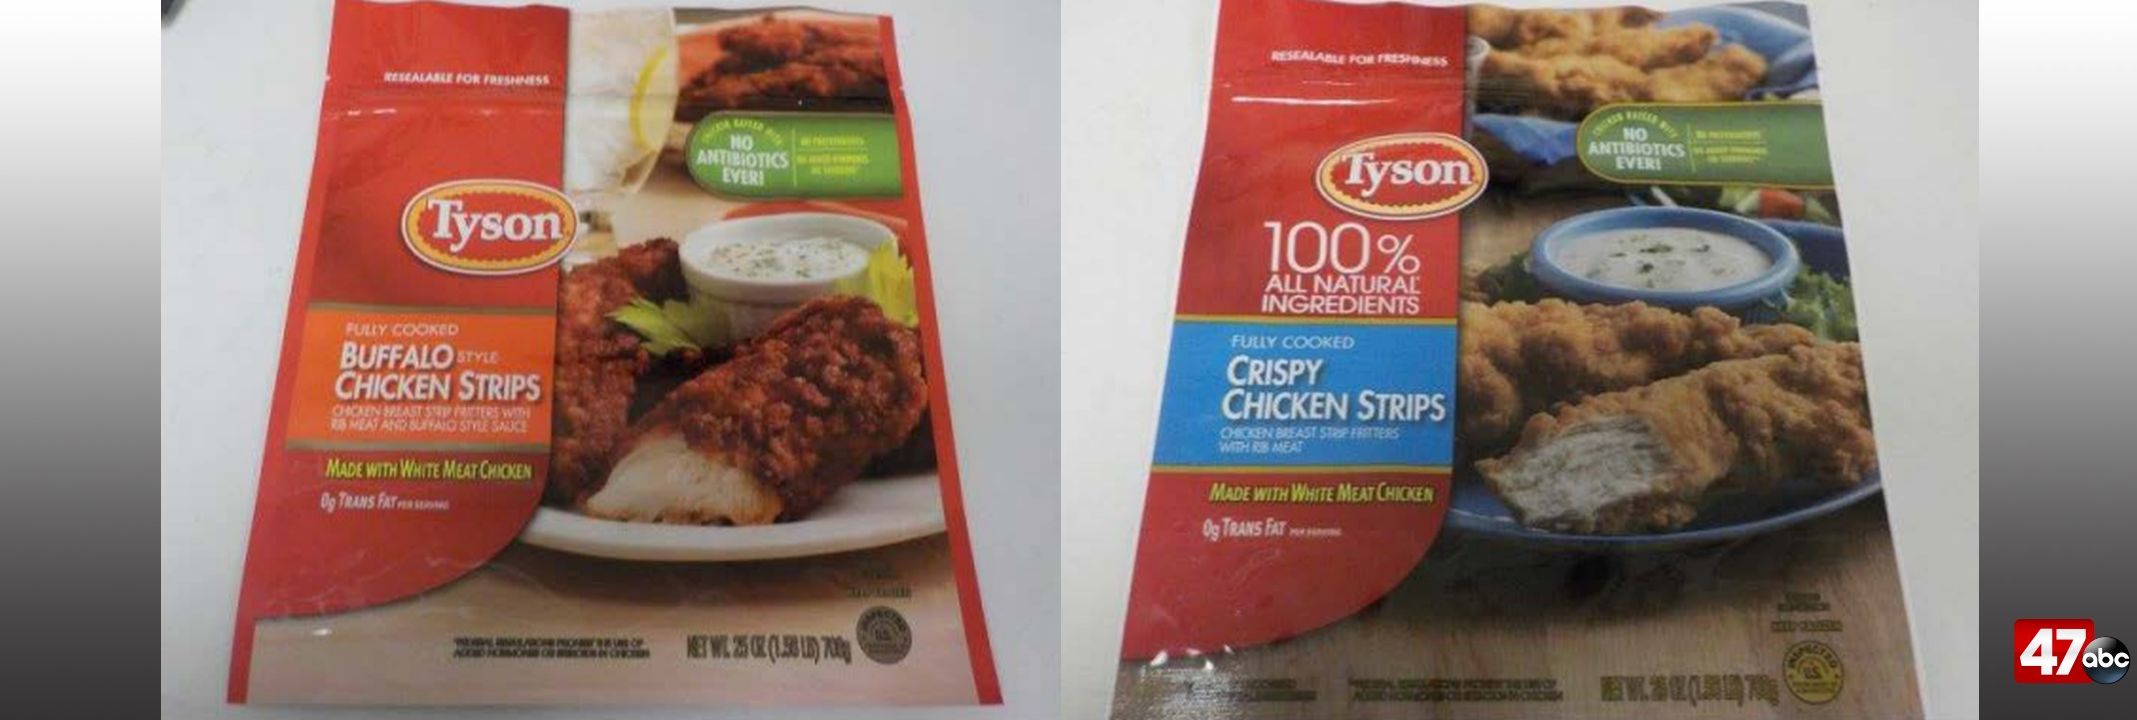 Tyson recalls 69,000 pounds of chicken strips due to possible